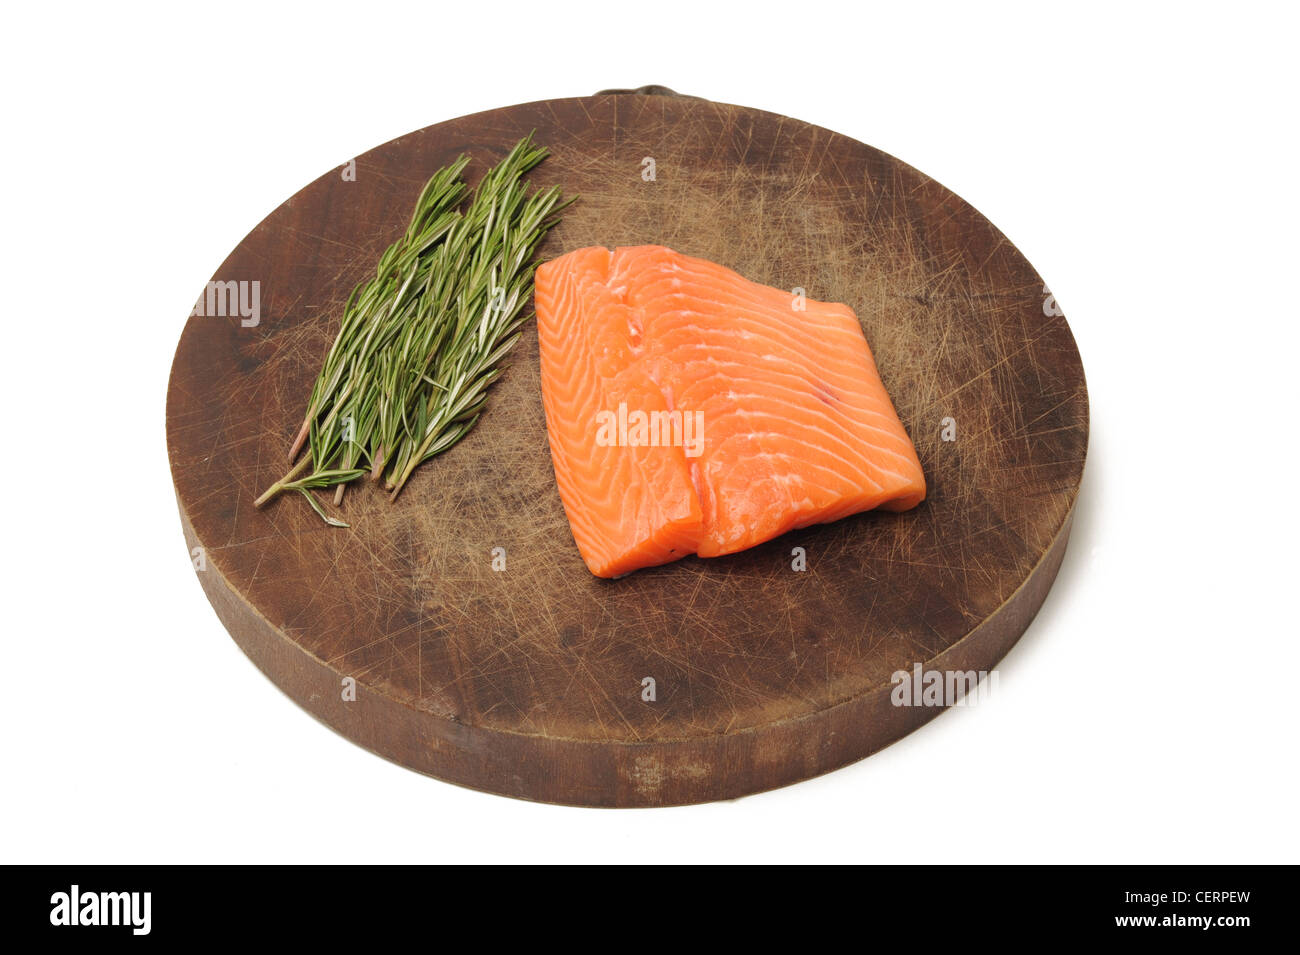 Salmon fillet on a wooden chopping board Stock Photo